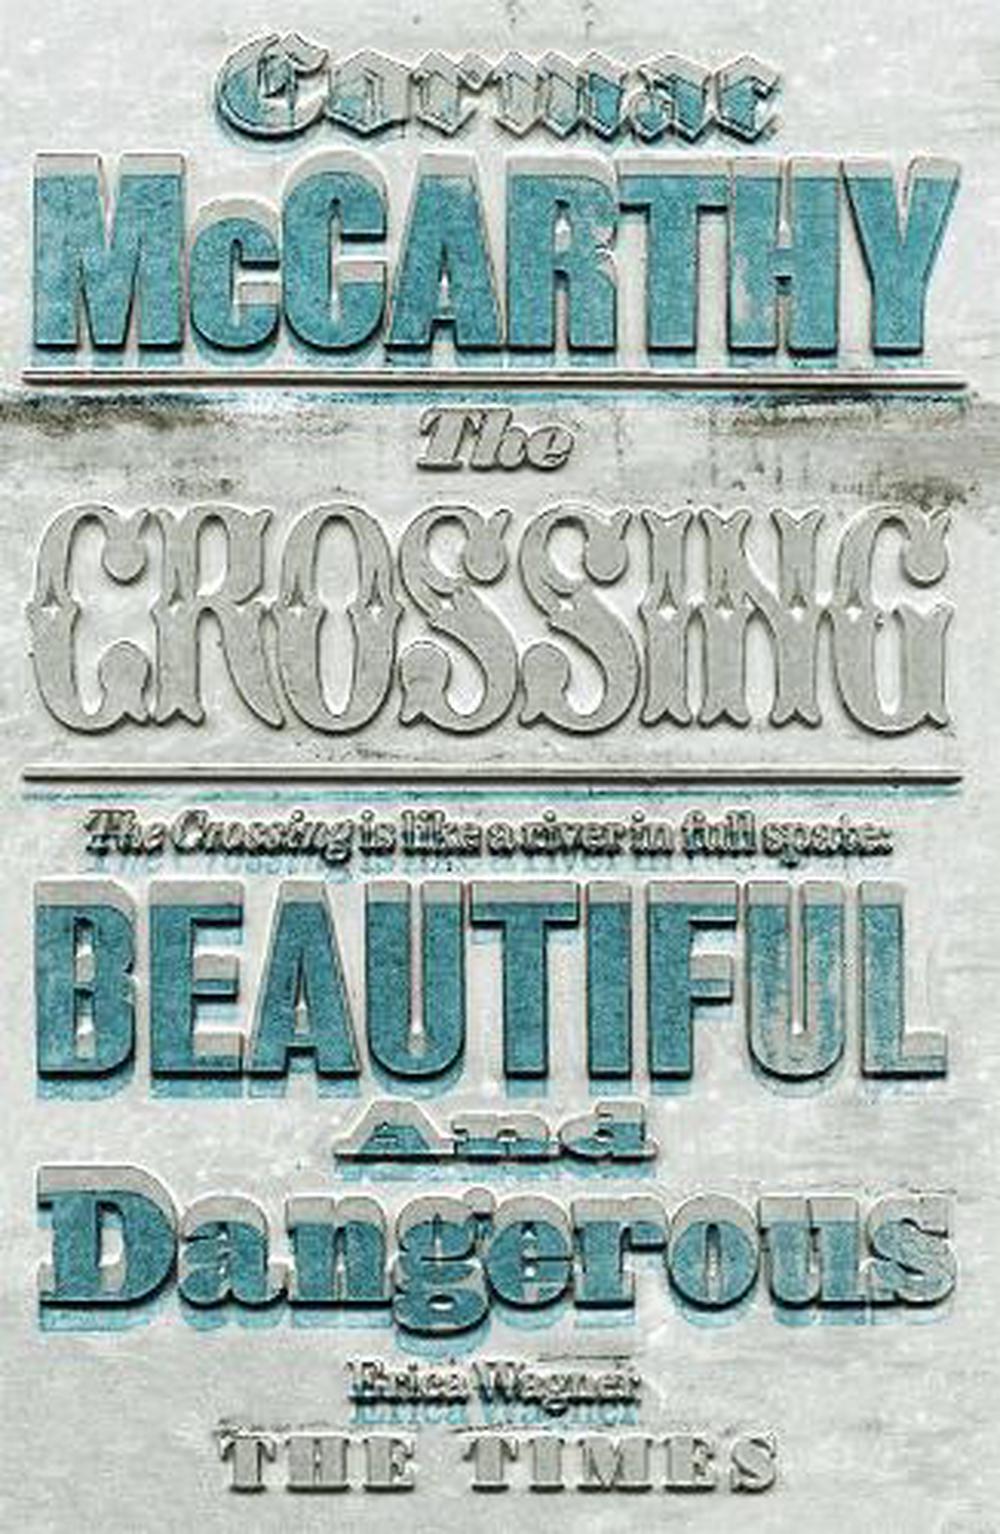 McCarthy,　The　Paperback,　9780330511247　Buy　by　at　Nile　The　Cormac　Crossing　online